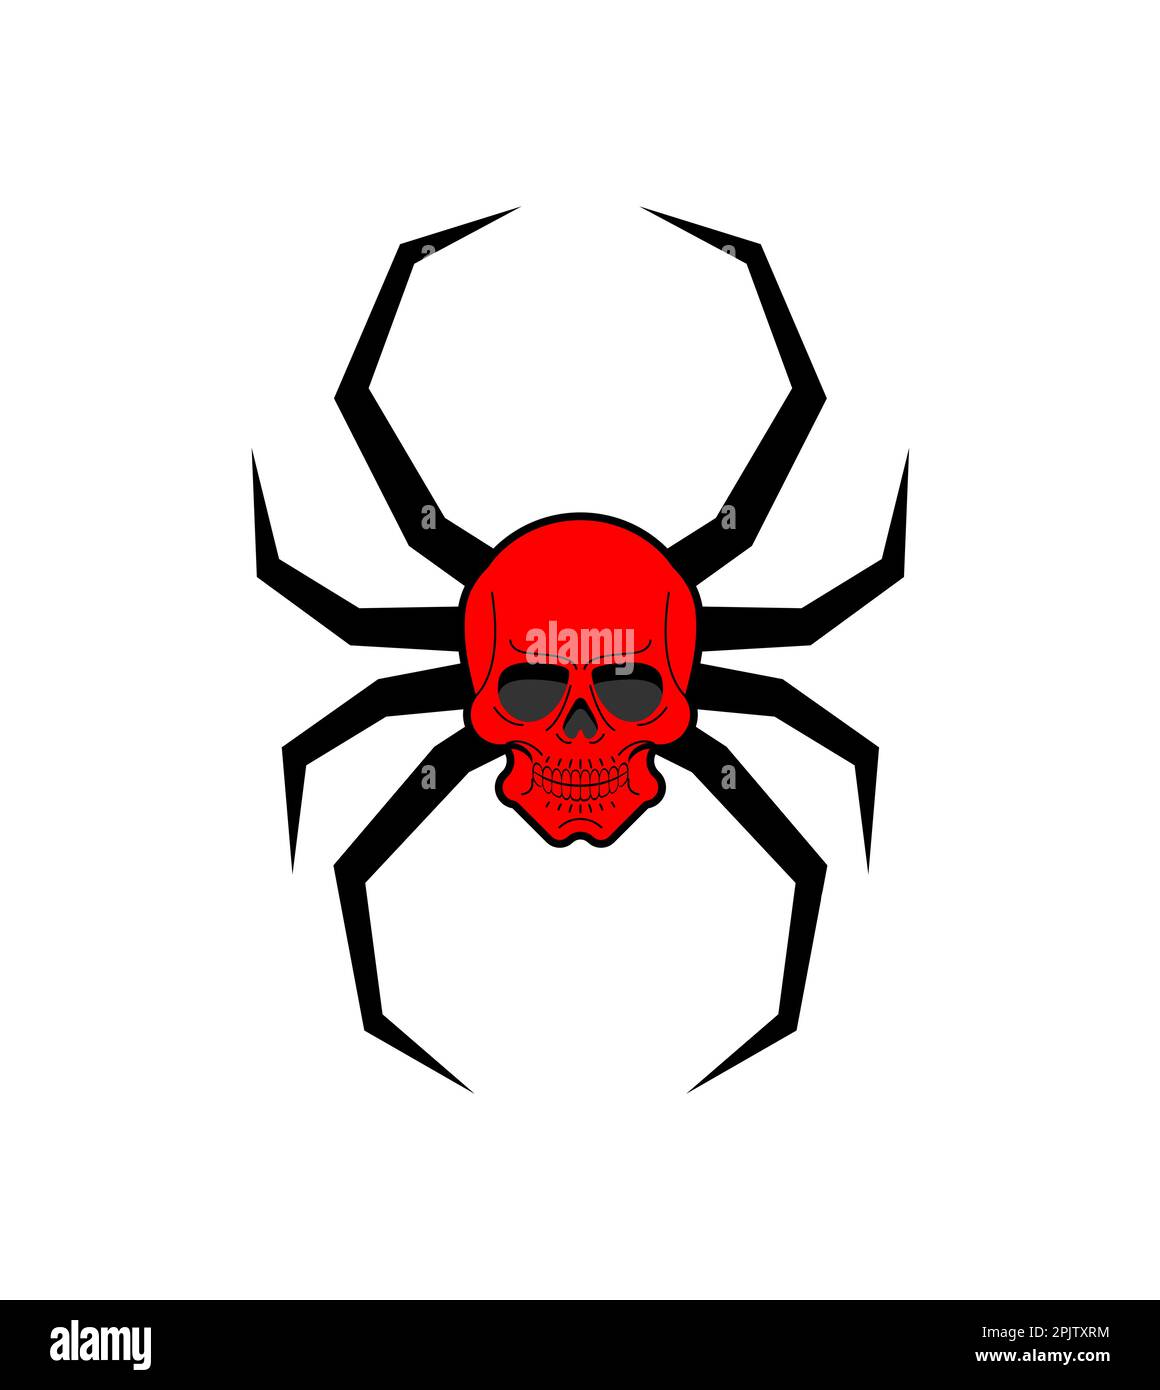 Black Widow Spider Isolated Poisonous Dangerous Spider Stock Vector